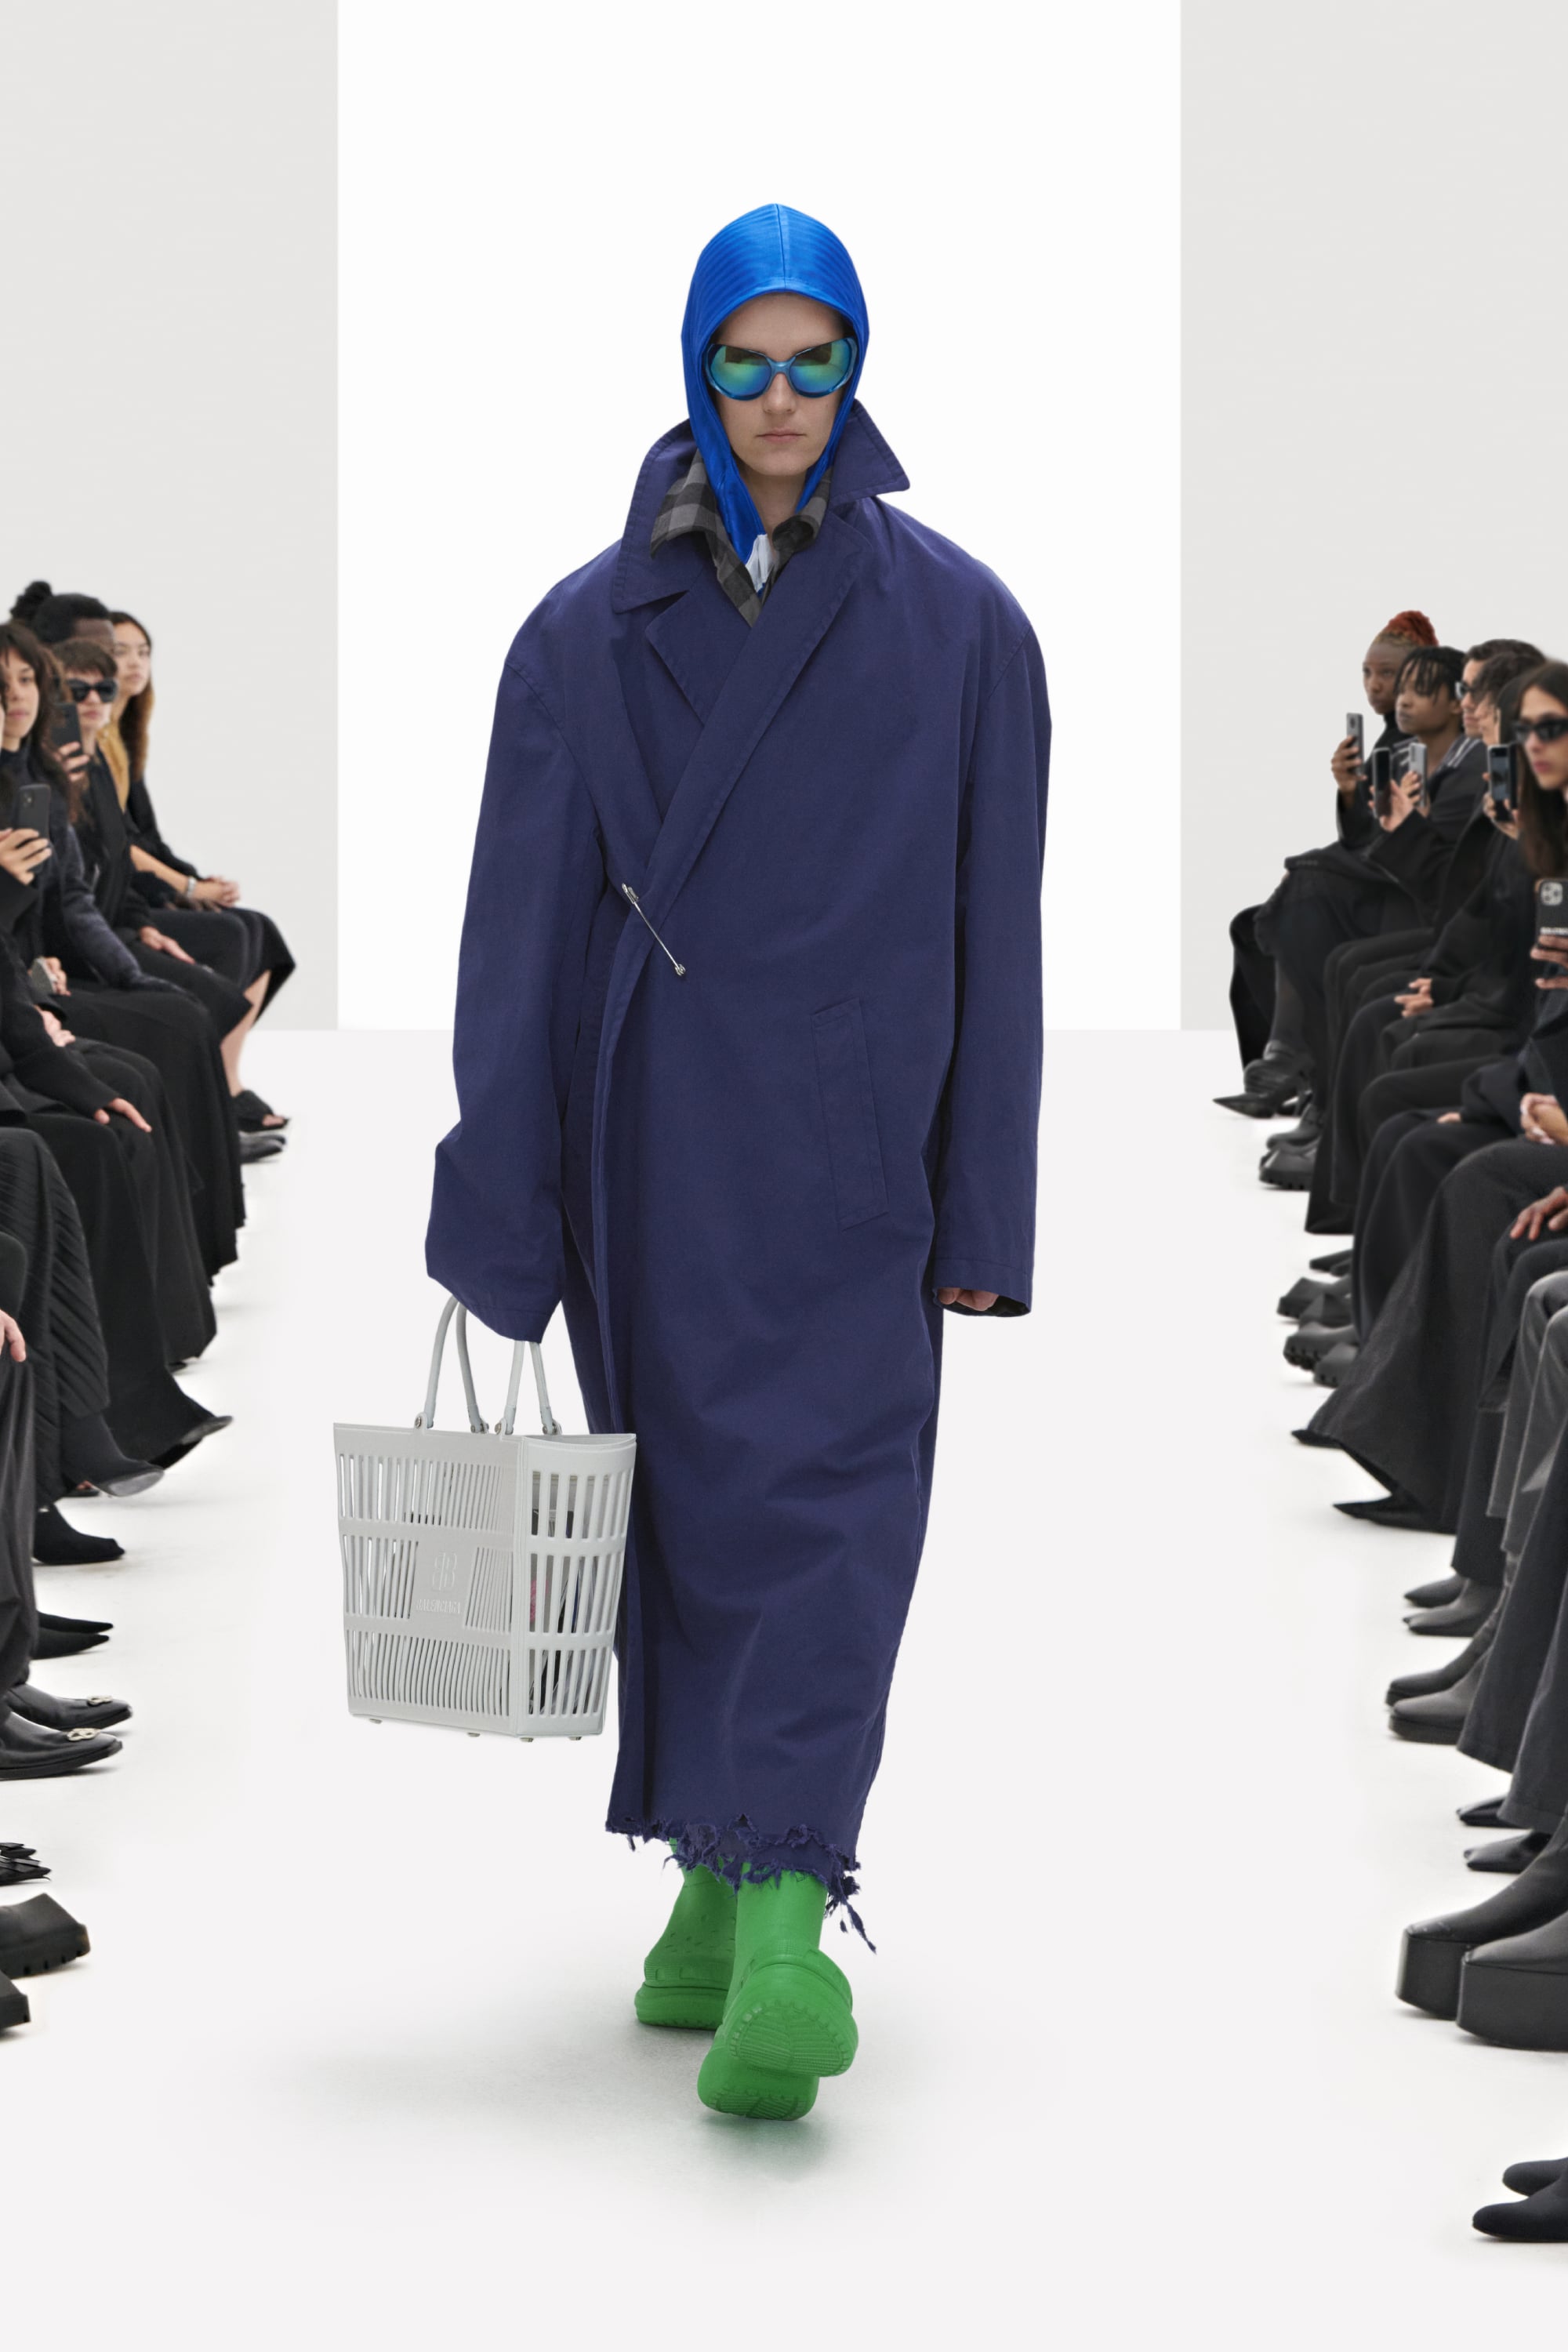 Balenciaga Crocs Pool Style: Details, Price, Photos and More – WWD